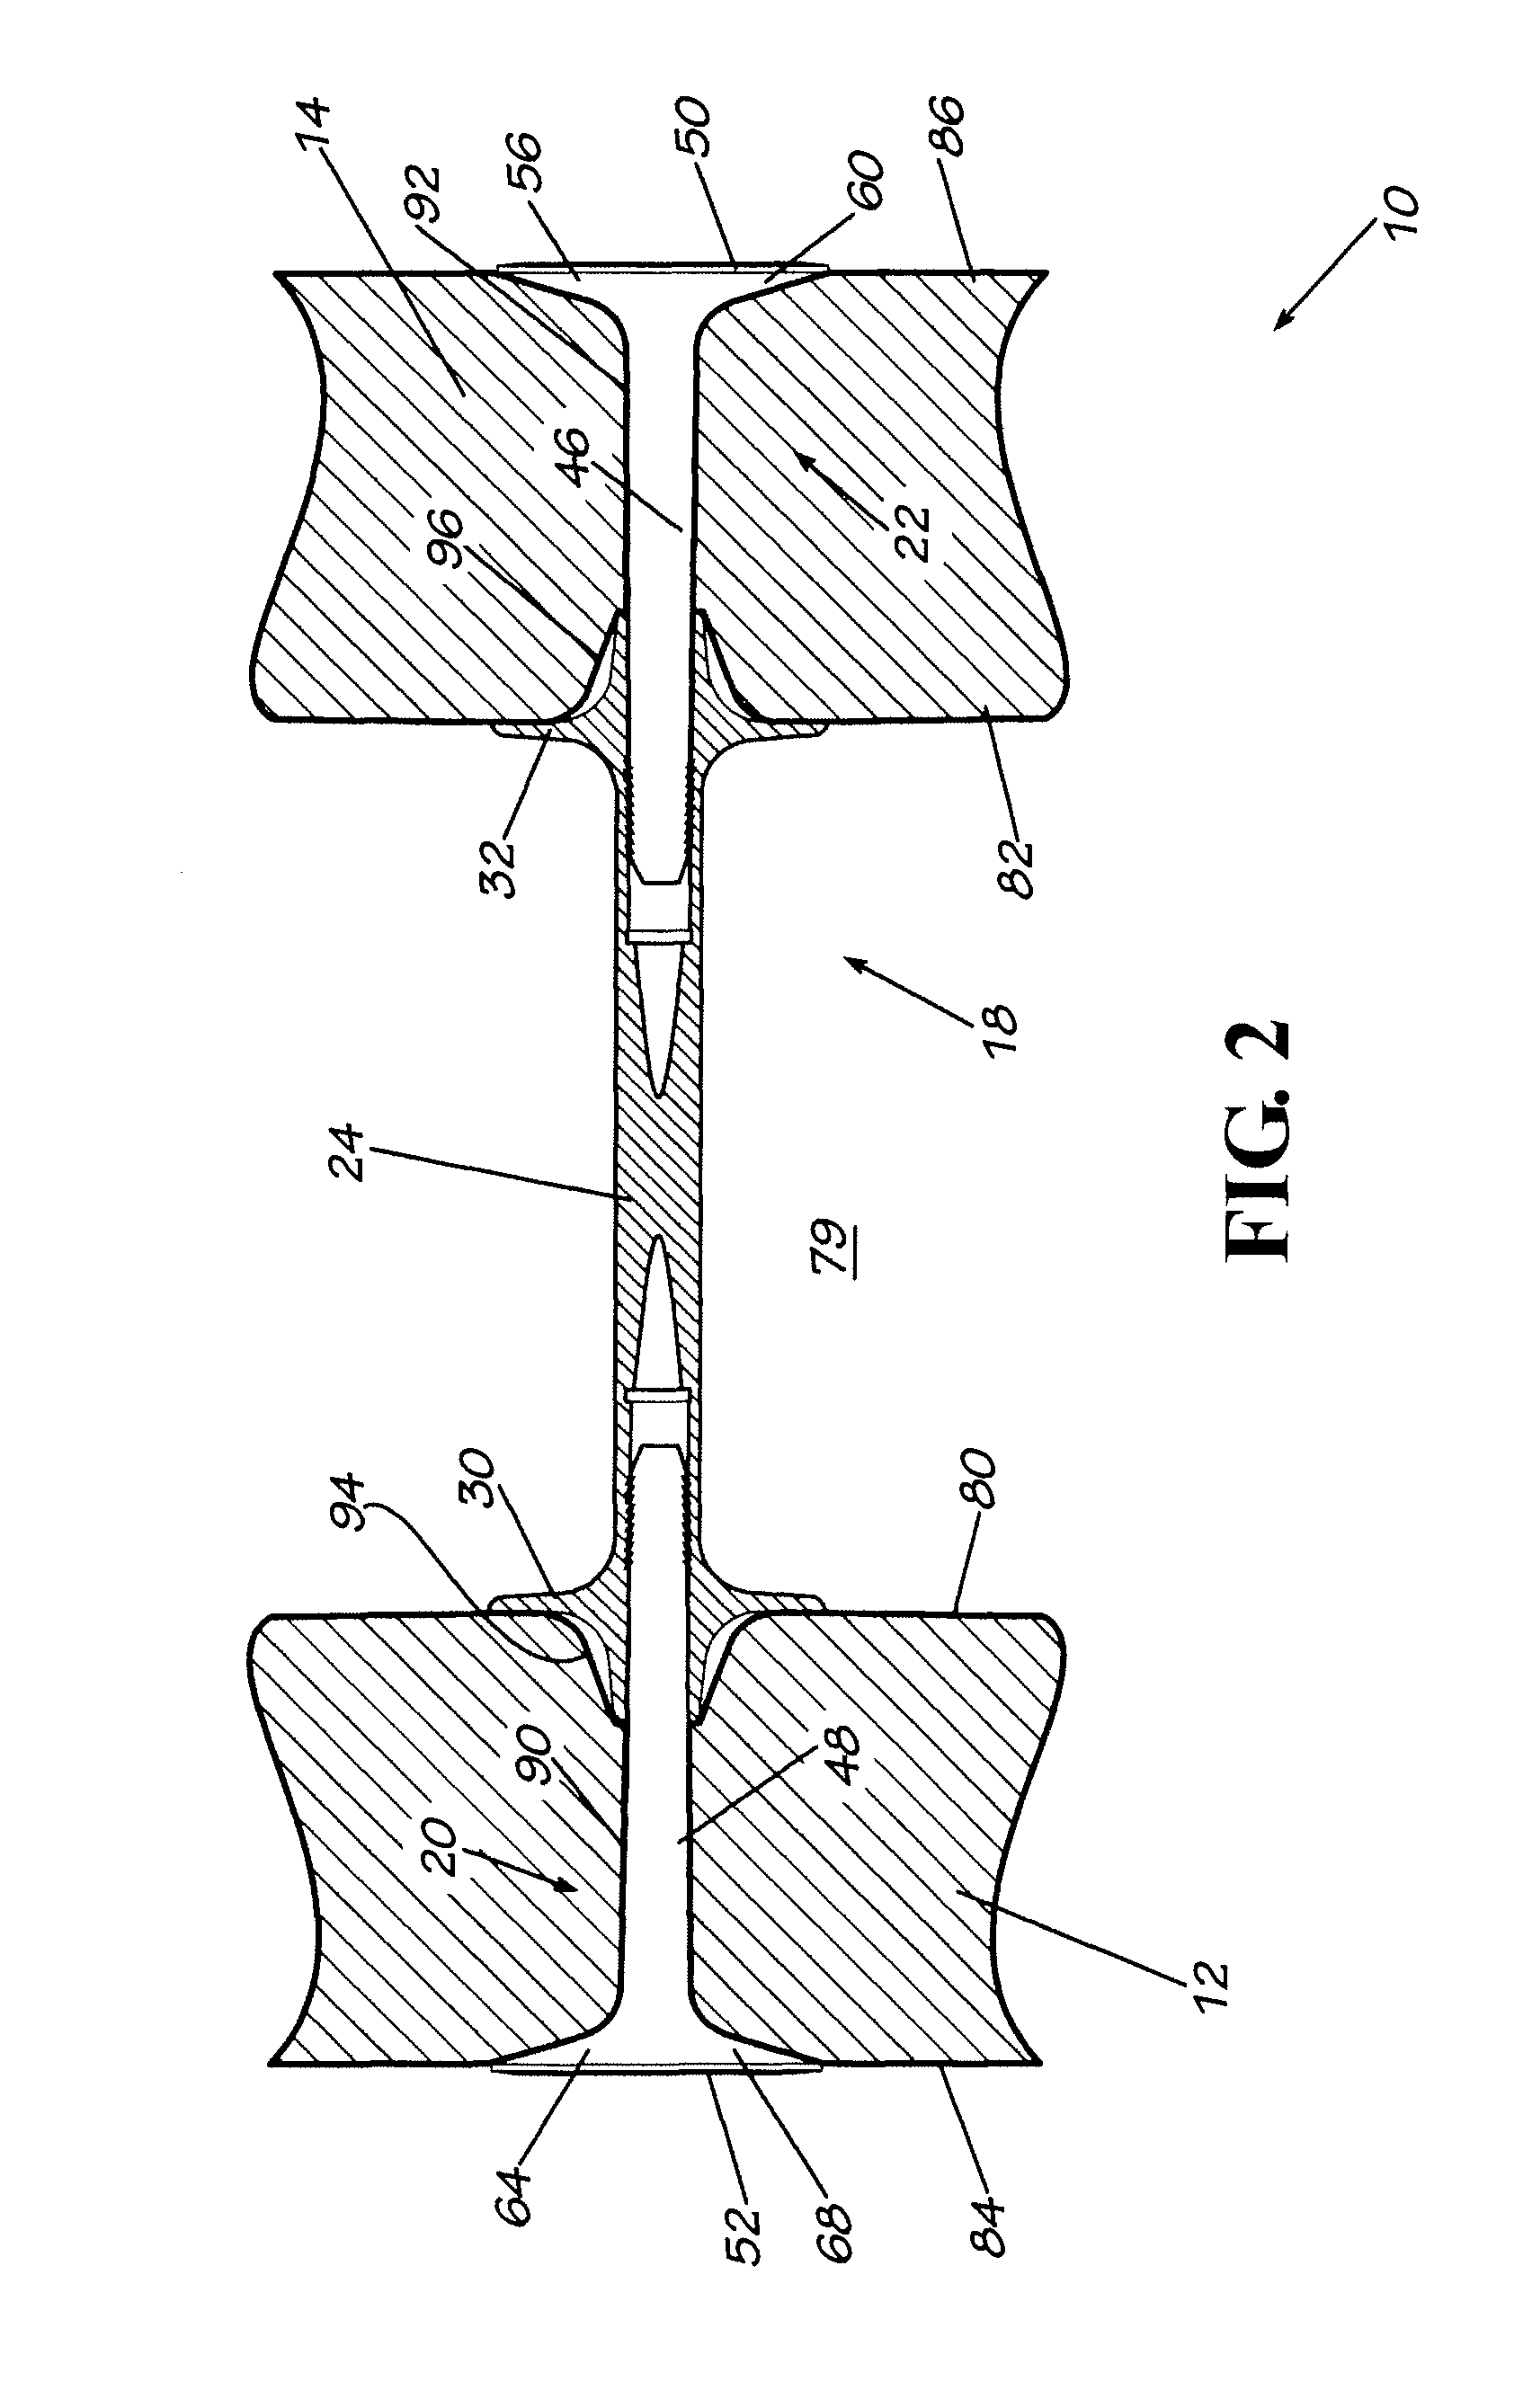 Reinforced insulated concrete form